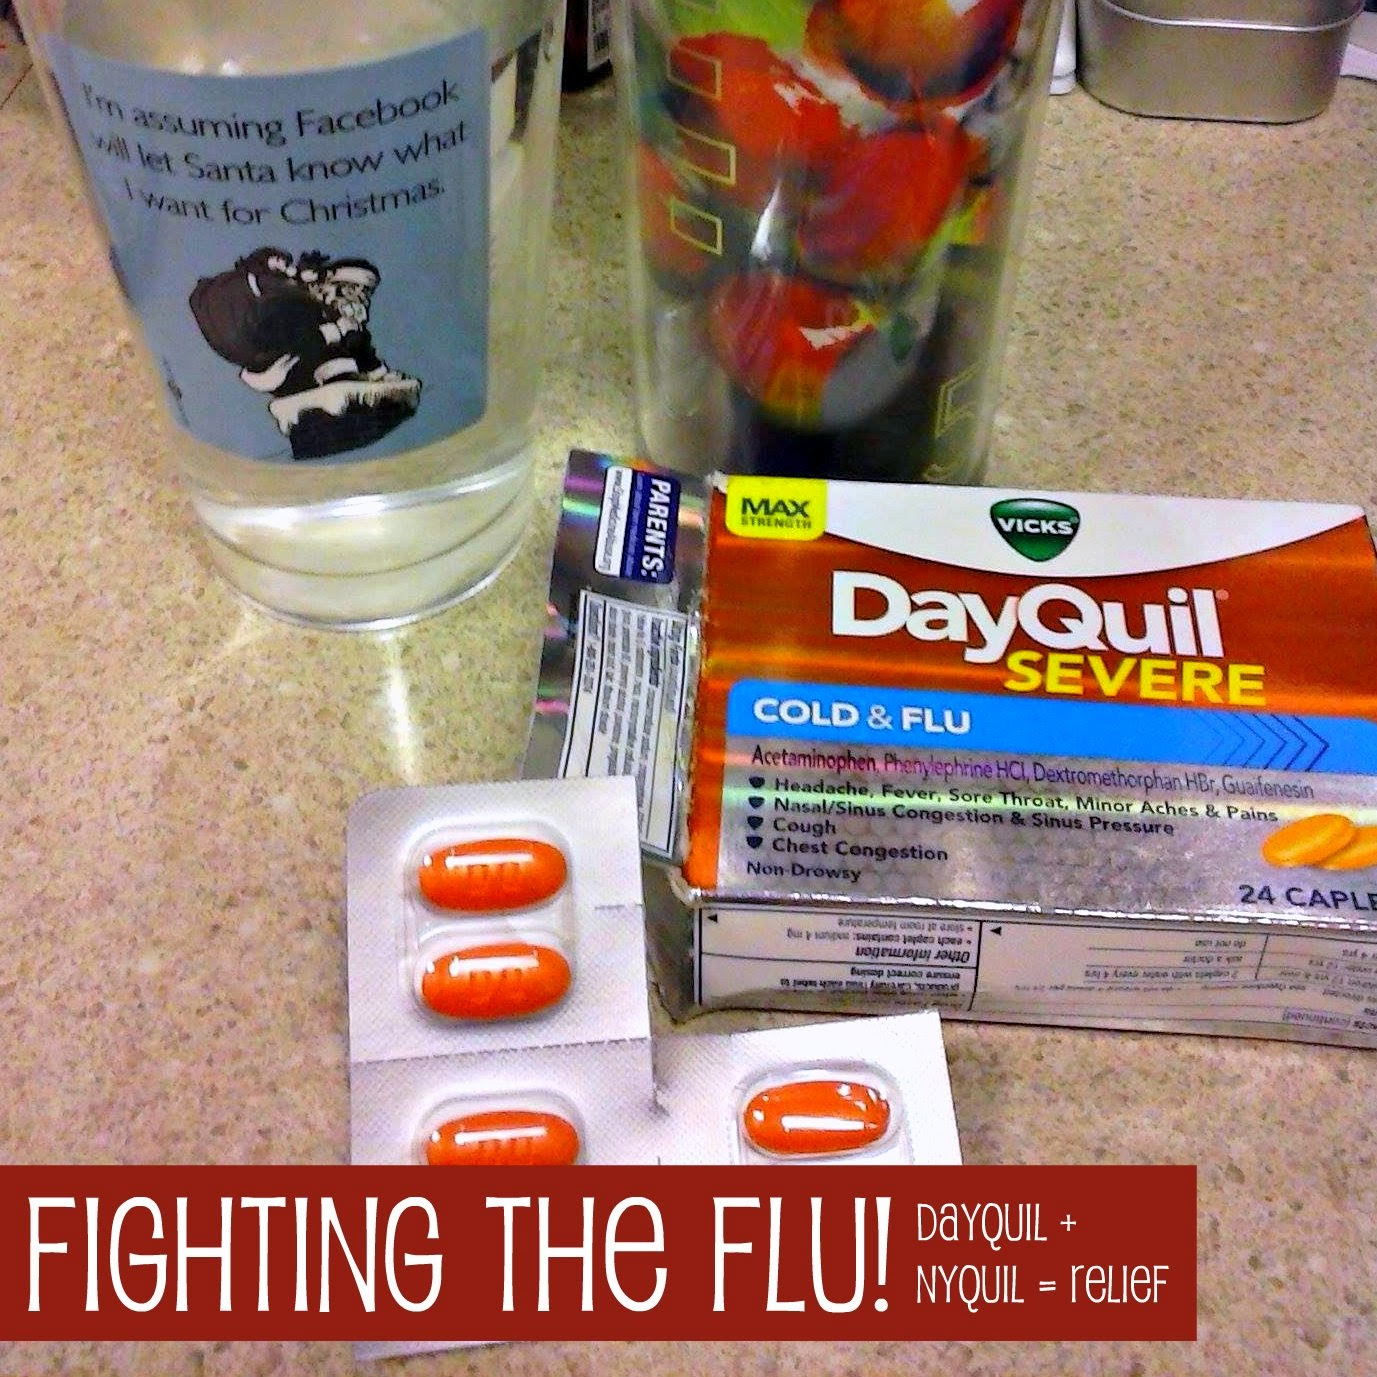 Flu Season is Upon Us and #ReliefIsHere from @Walmart 